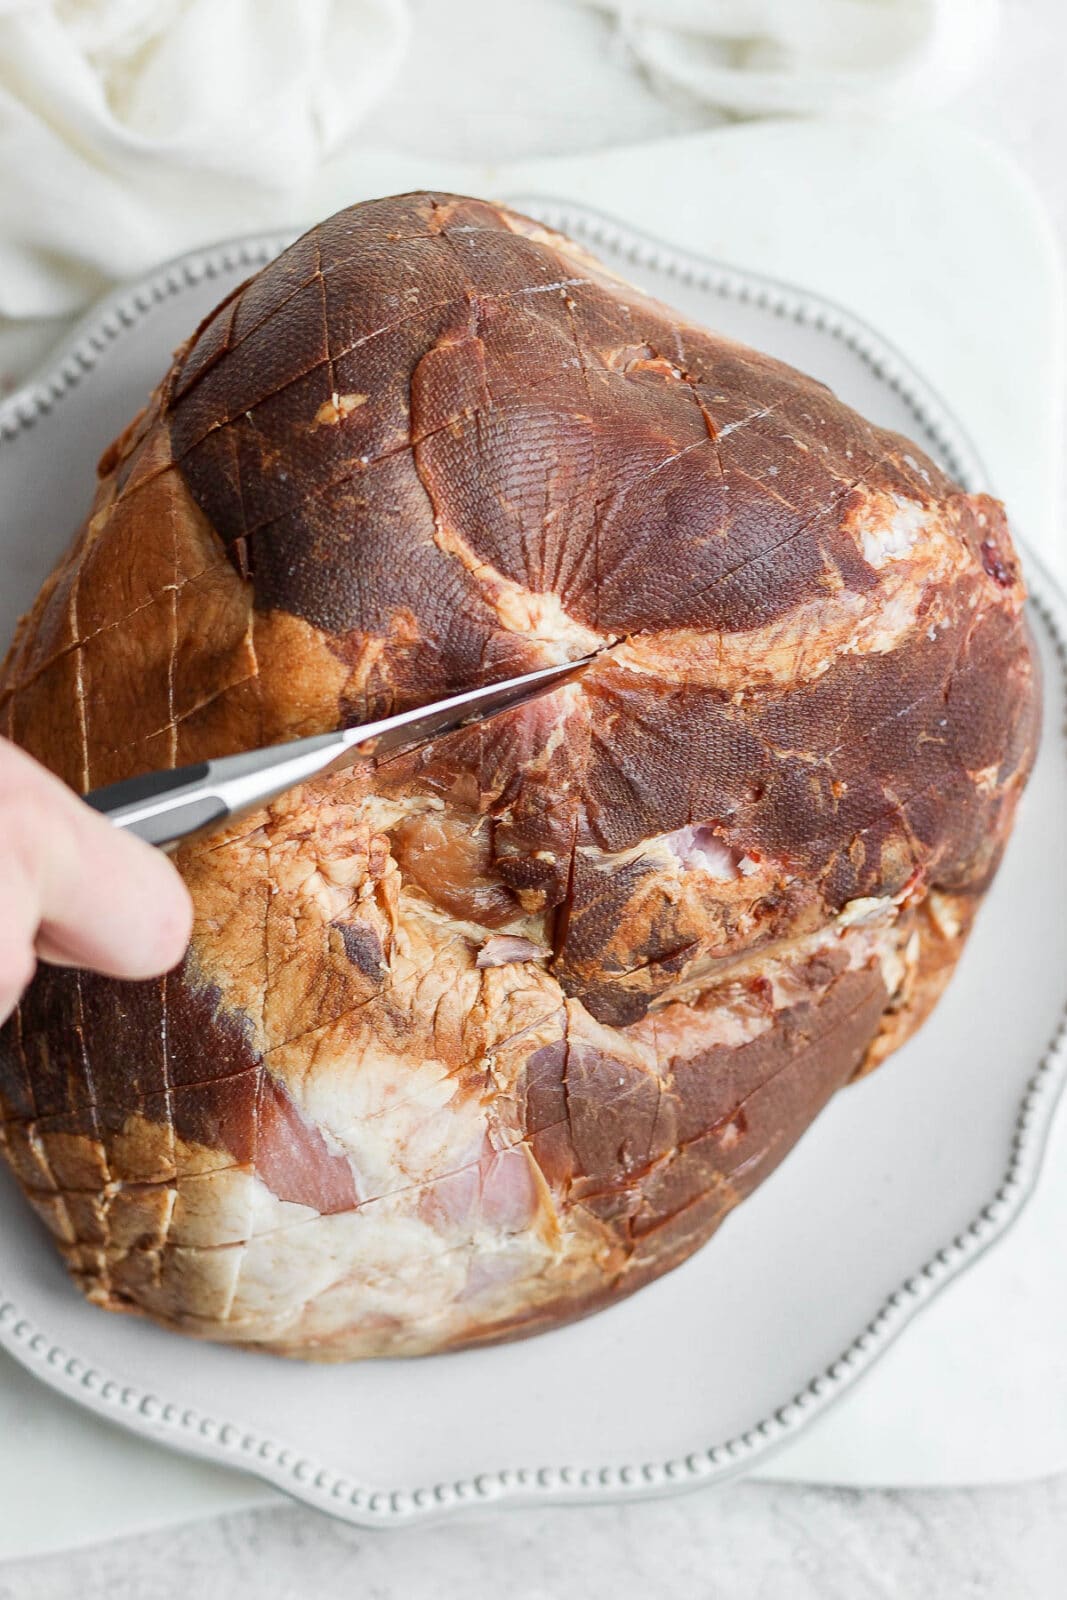 Scoring a ham with a knife on a plate.